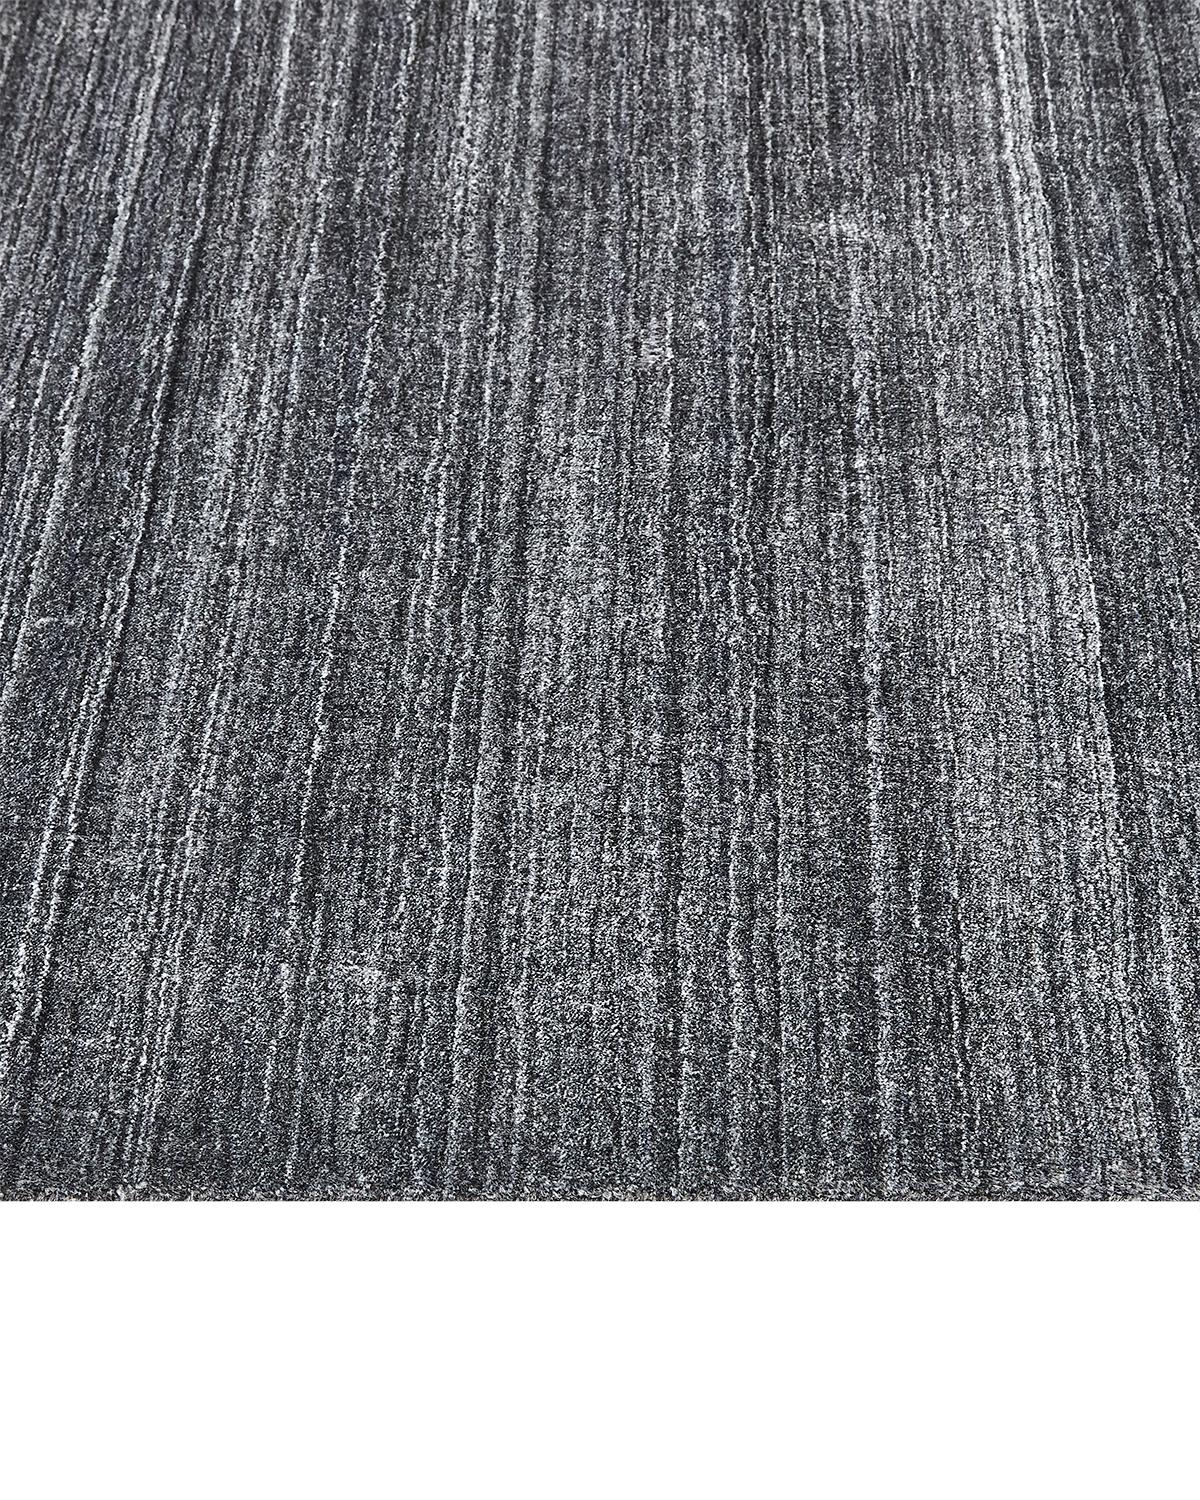 Indian Solo Rugs Solid Modern Hand Loomed Dark Gray Area Rug For Sale